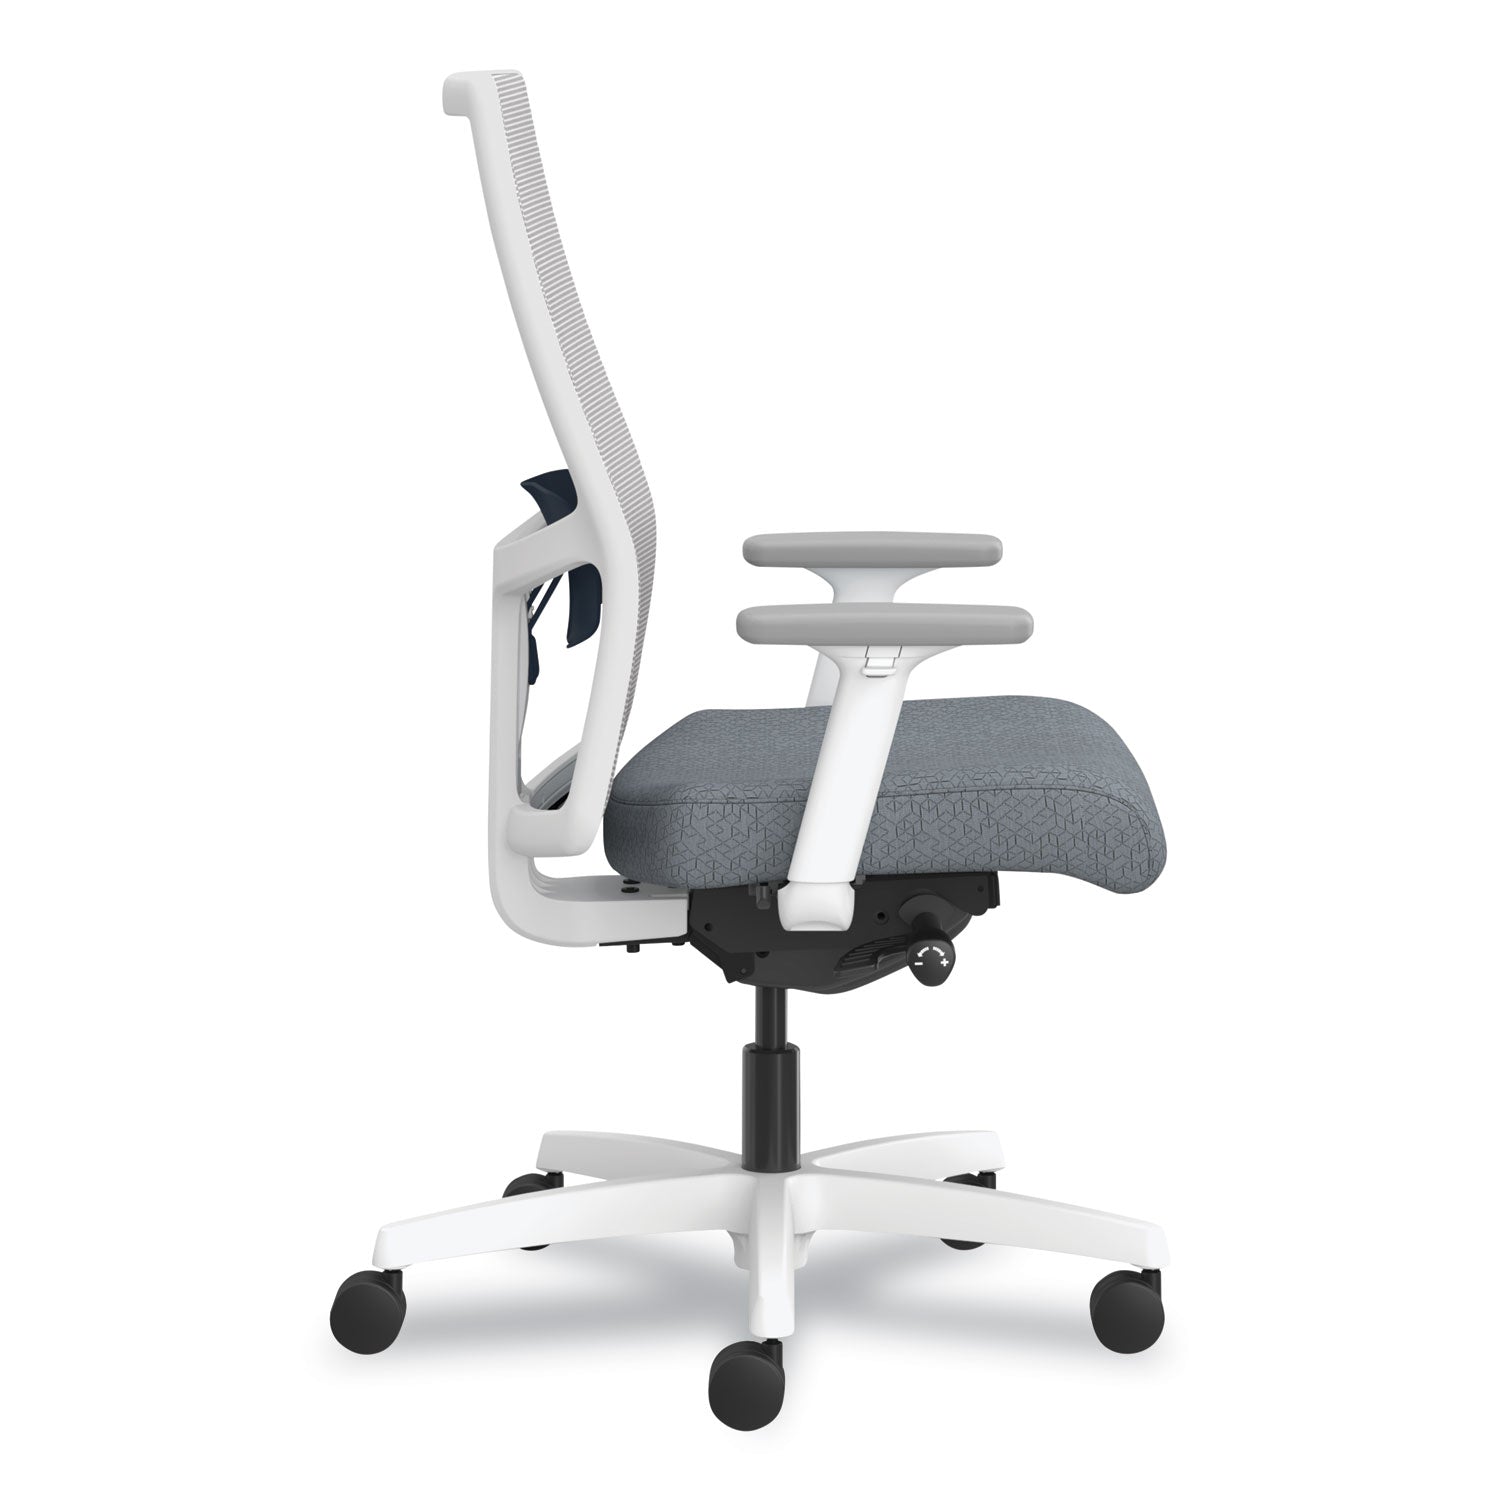 ignition-20-4-way-stretch-mid-back-mesh-task-chair-navy-blue-lumbar-support-basalt-fog-white-ships-in-7-10-business-days_honi2mm2afa25ex - 3